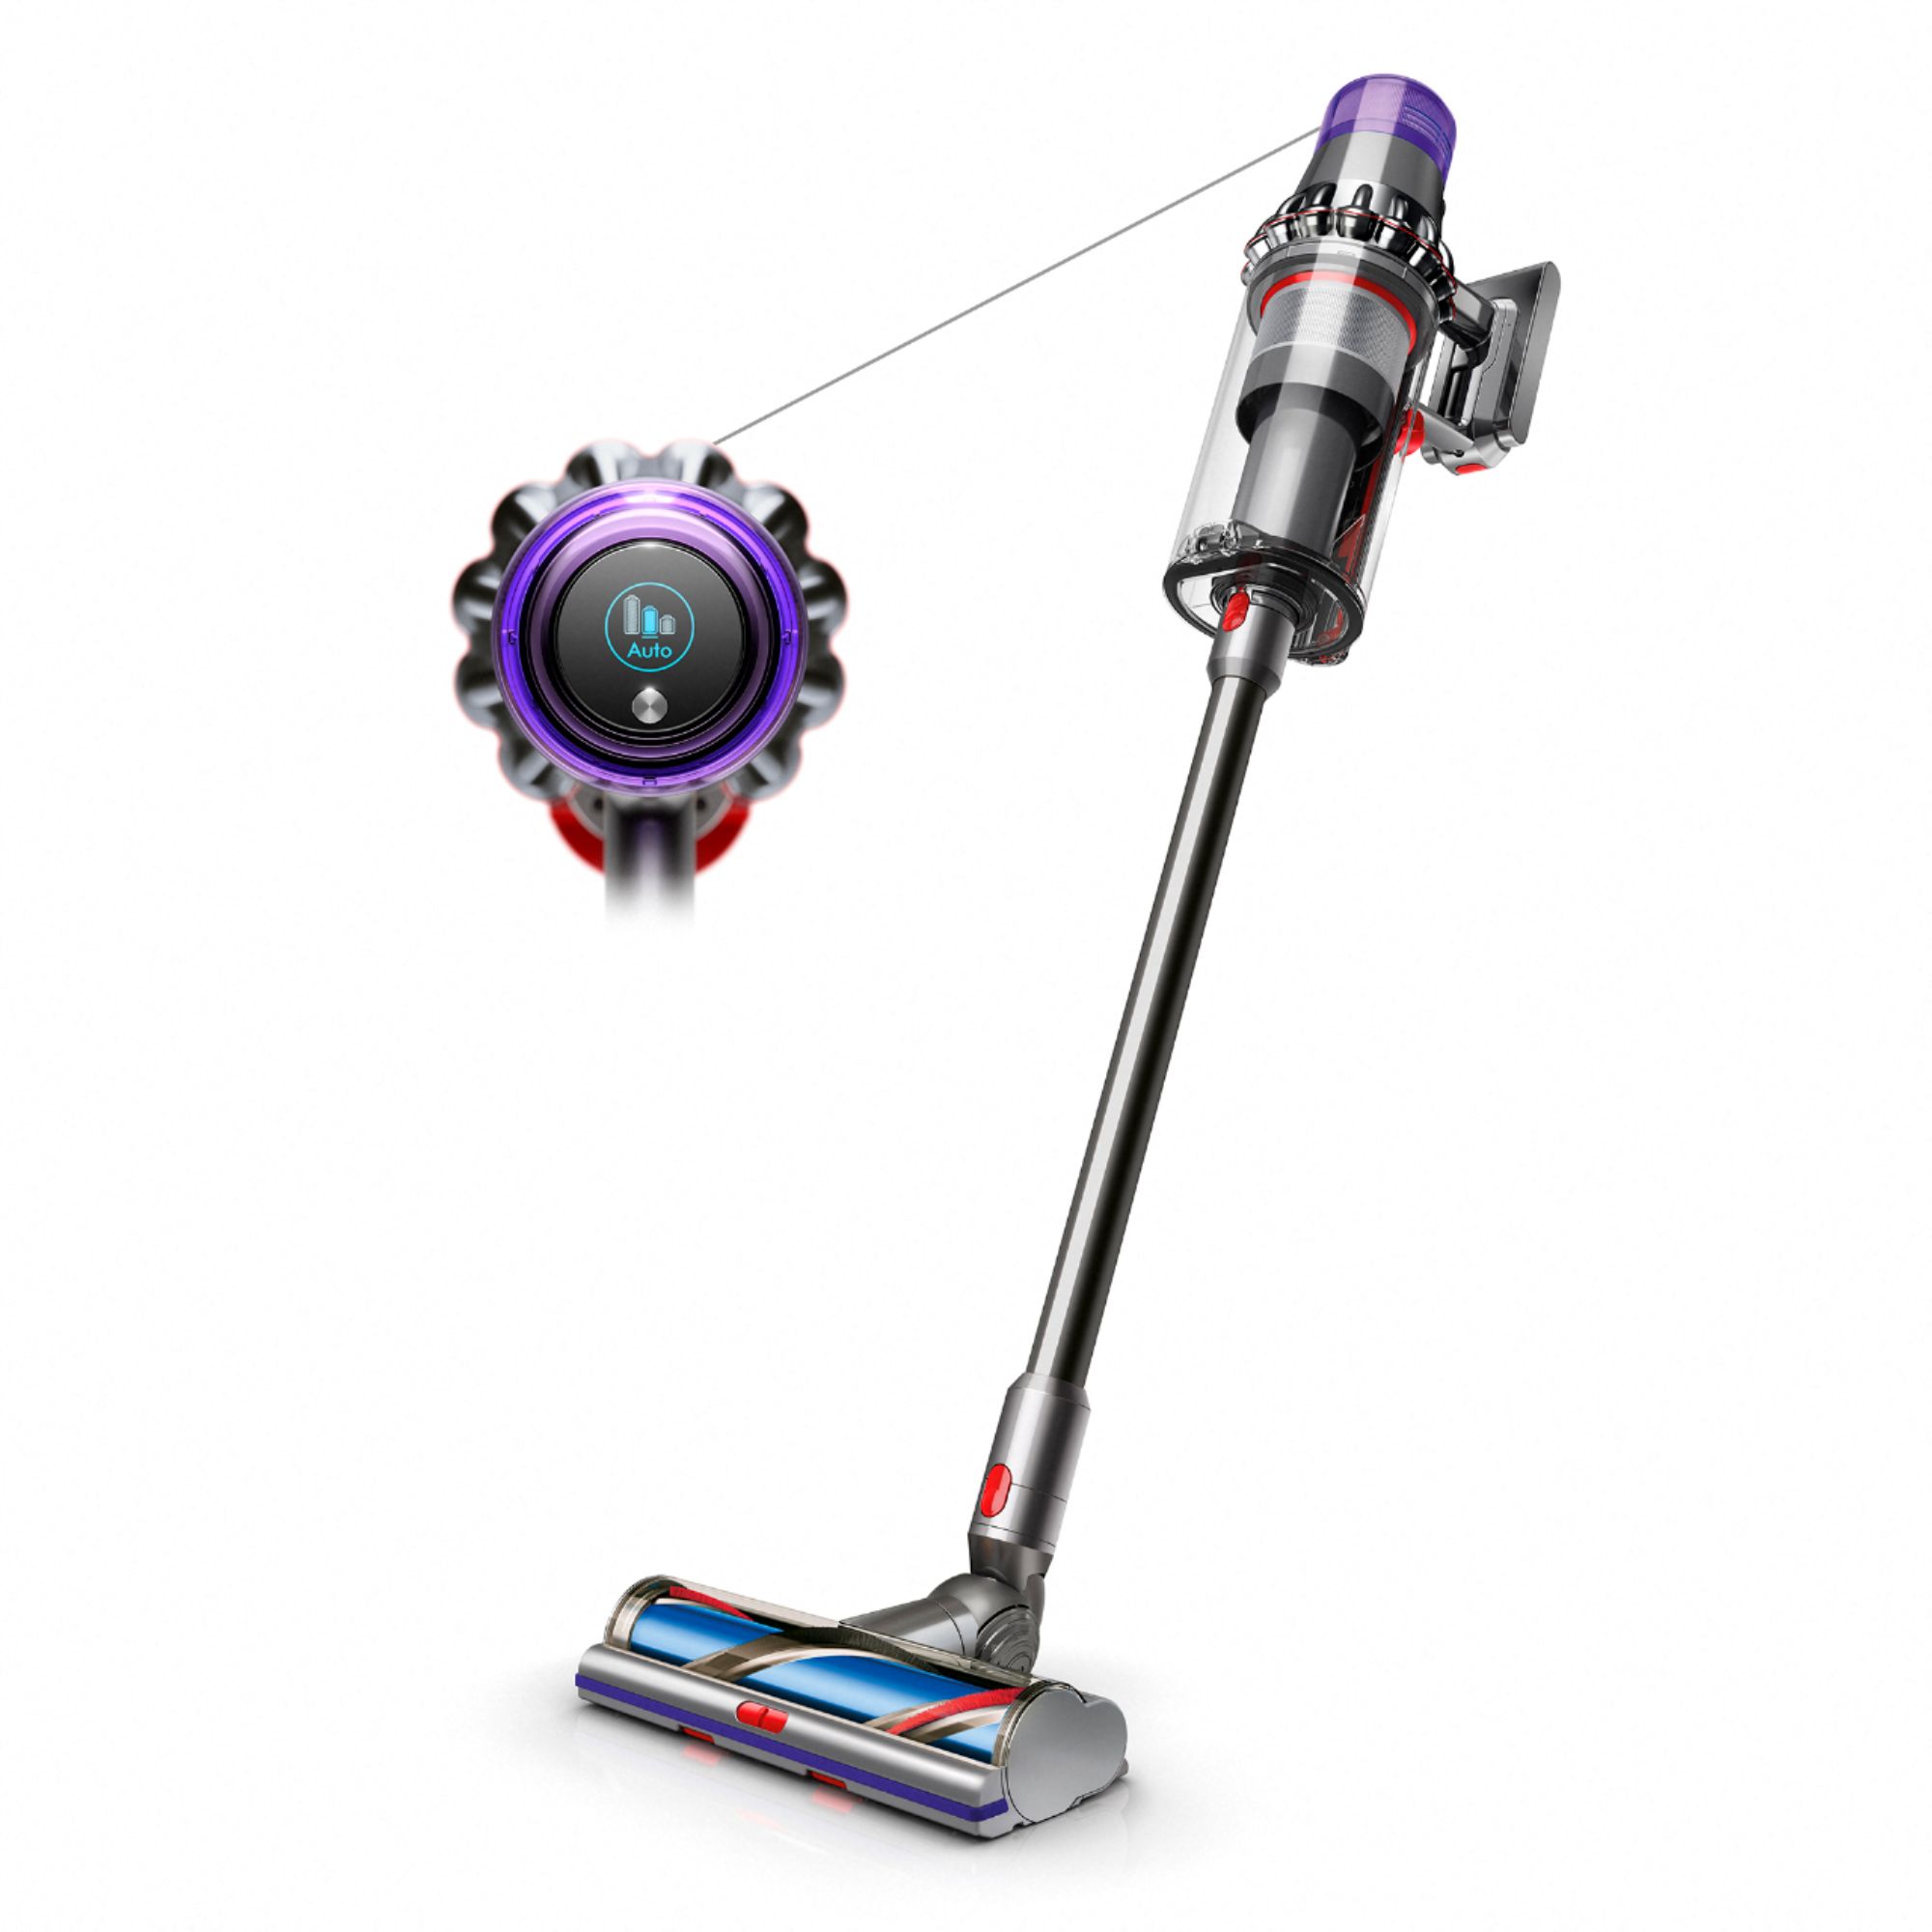 Dyson - Outsize Cordless Vacuum Cleaner - Nickel - Best Buy Black Friday Deal $599.99